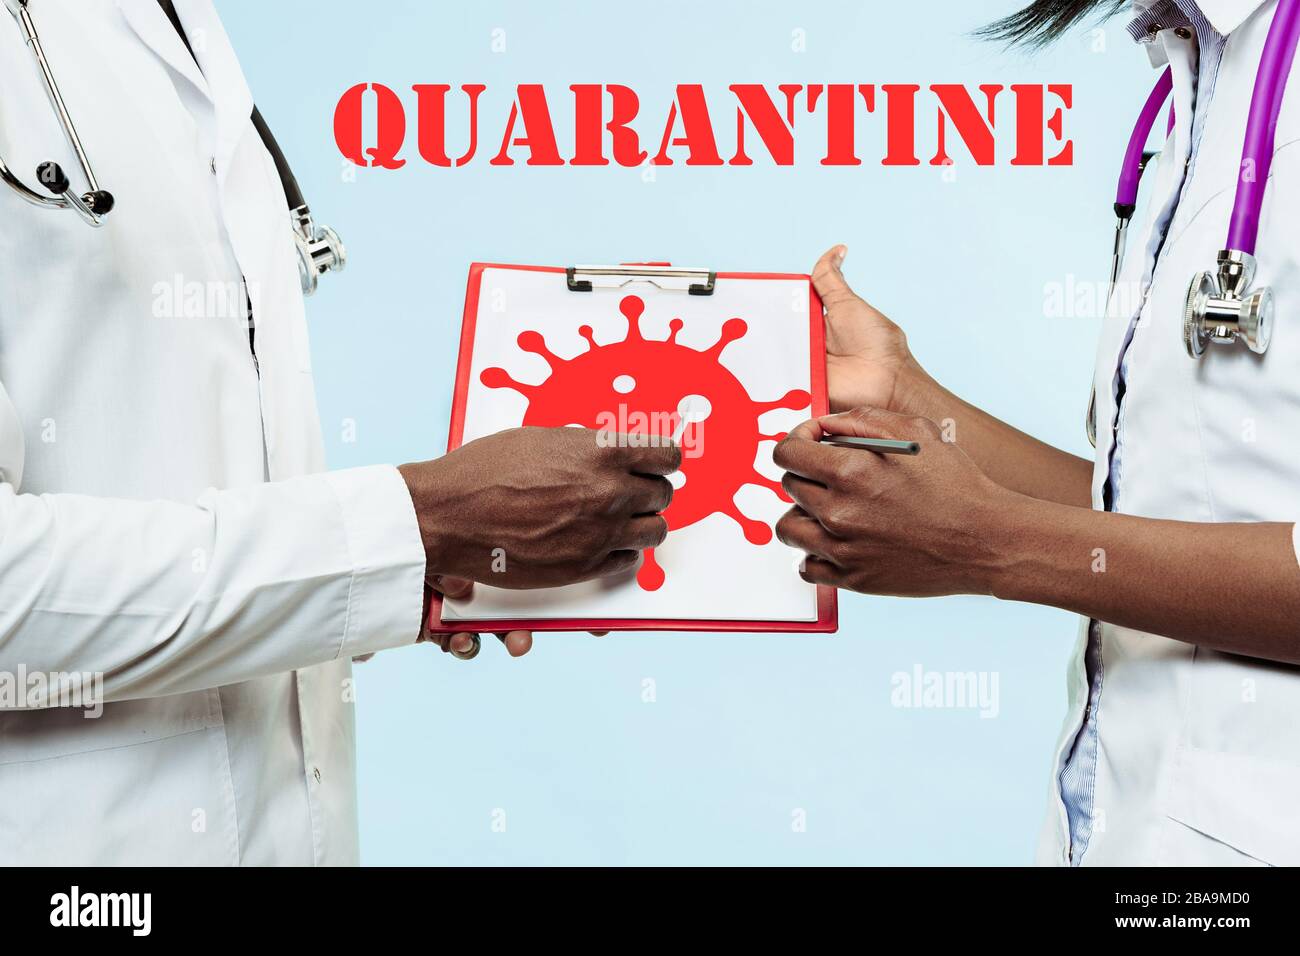 Doctors talking about coronavirus spreading stopping, quarantine, isolation and treatment for active cases. Flu virus protection, prevention. Healthcare and medicine while pandemic. Outbreak caution. Stock Photo